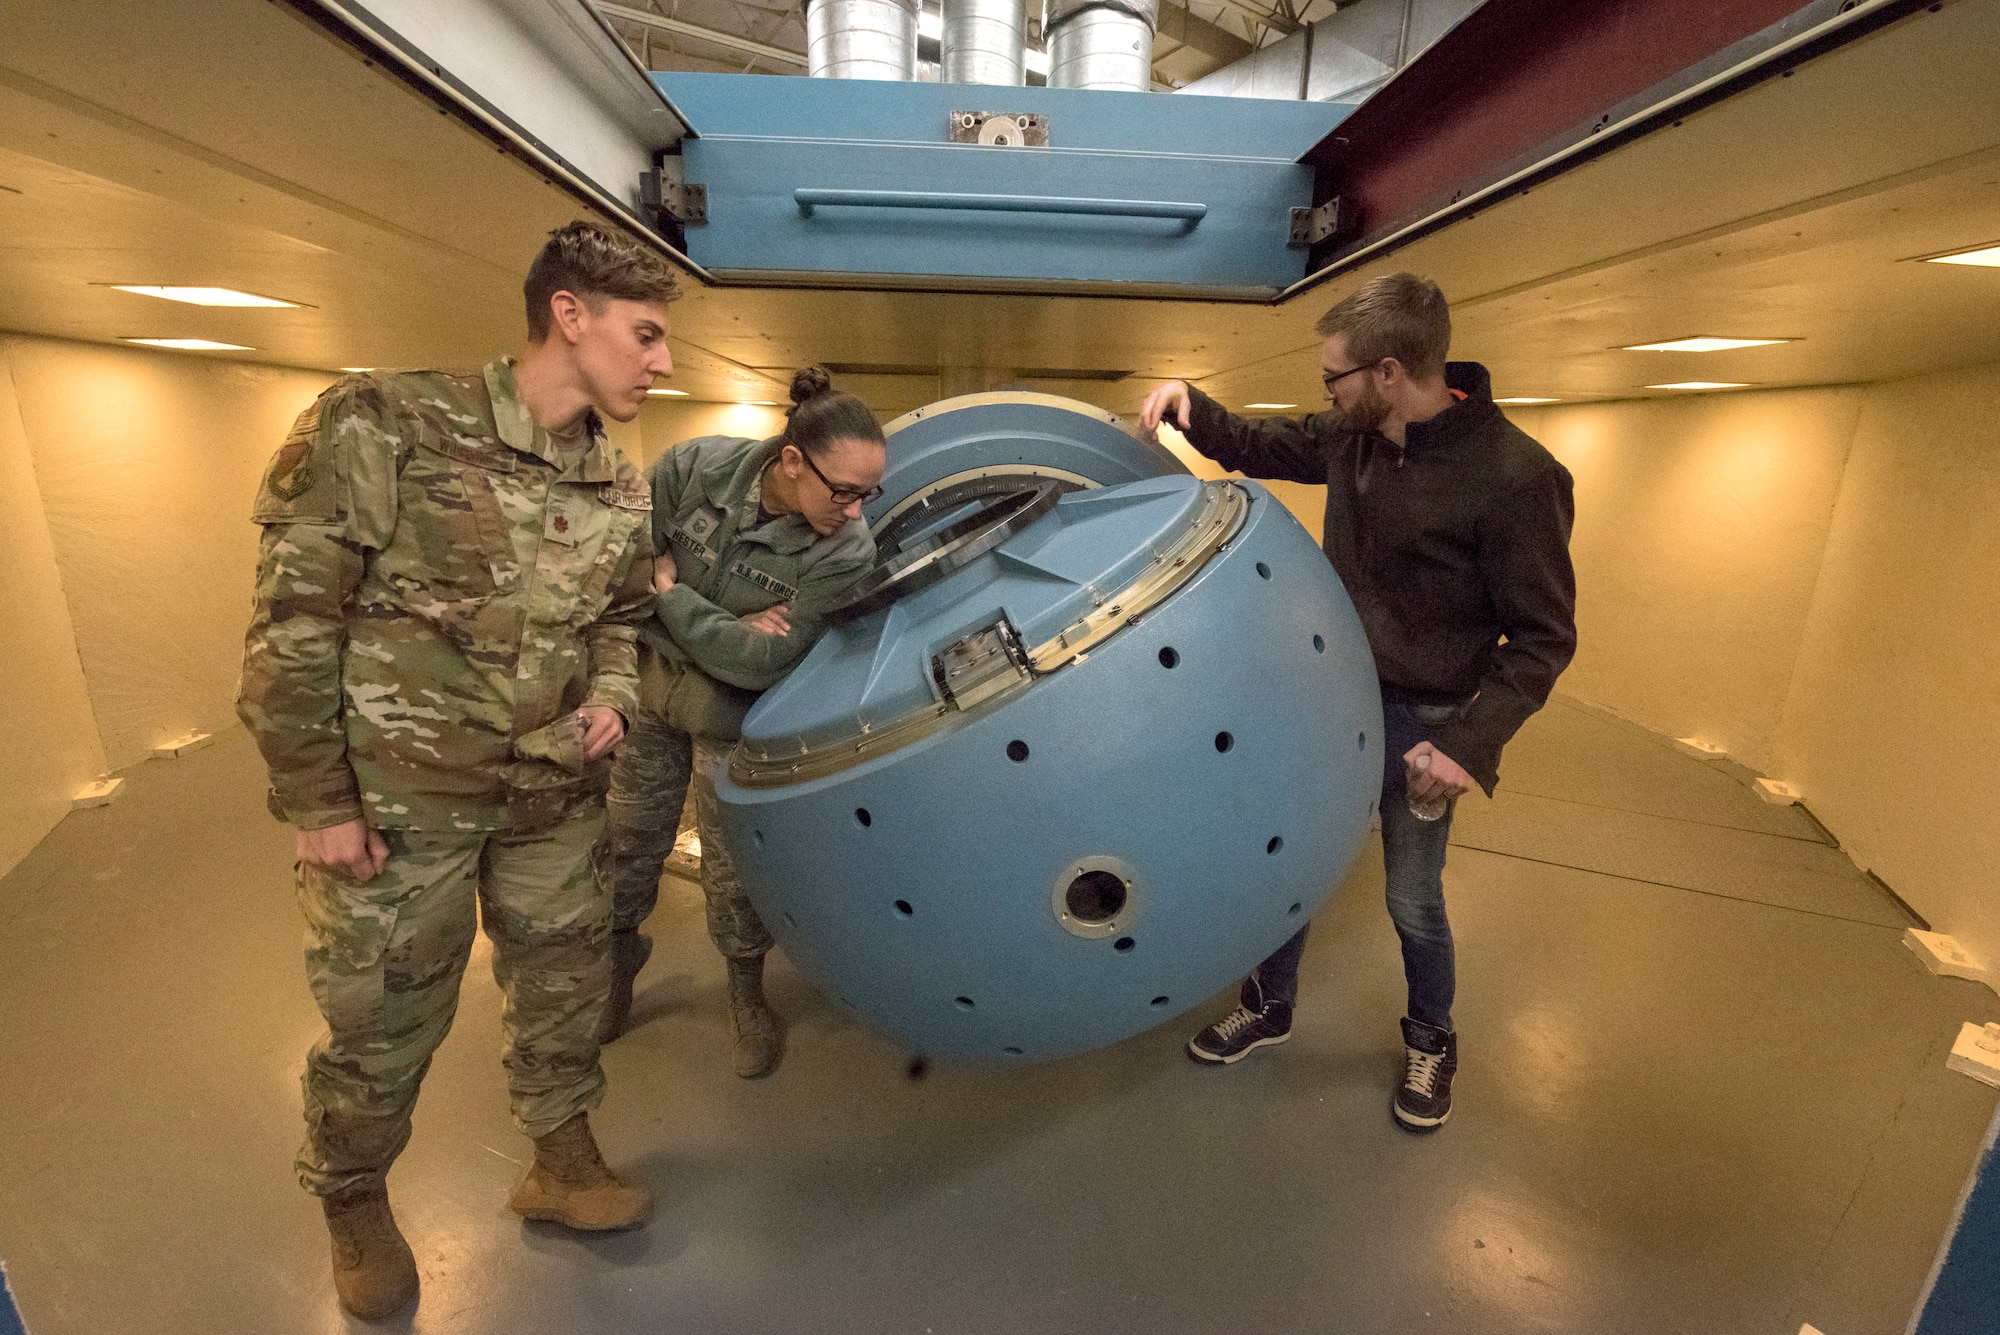 Sean Abrahamson, 746th Test Squadron test manager, shows event patrons a centrifuge used for testing, Oct. 25, 2019, on Holloman Air Force Base, N.M. The 746th TS centrifuge testing uses multi-axis test tables to check inertial performance on navigations systems prior to testing in aircraft. (U.S. Air Force photo by Staff Sgt. Christine Groening)